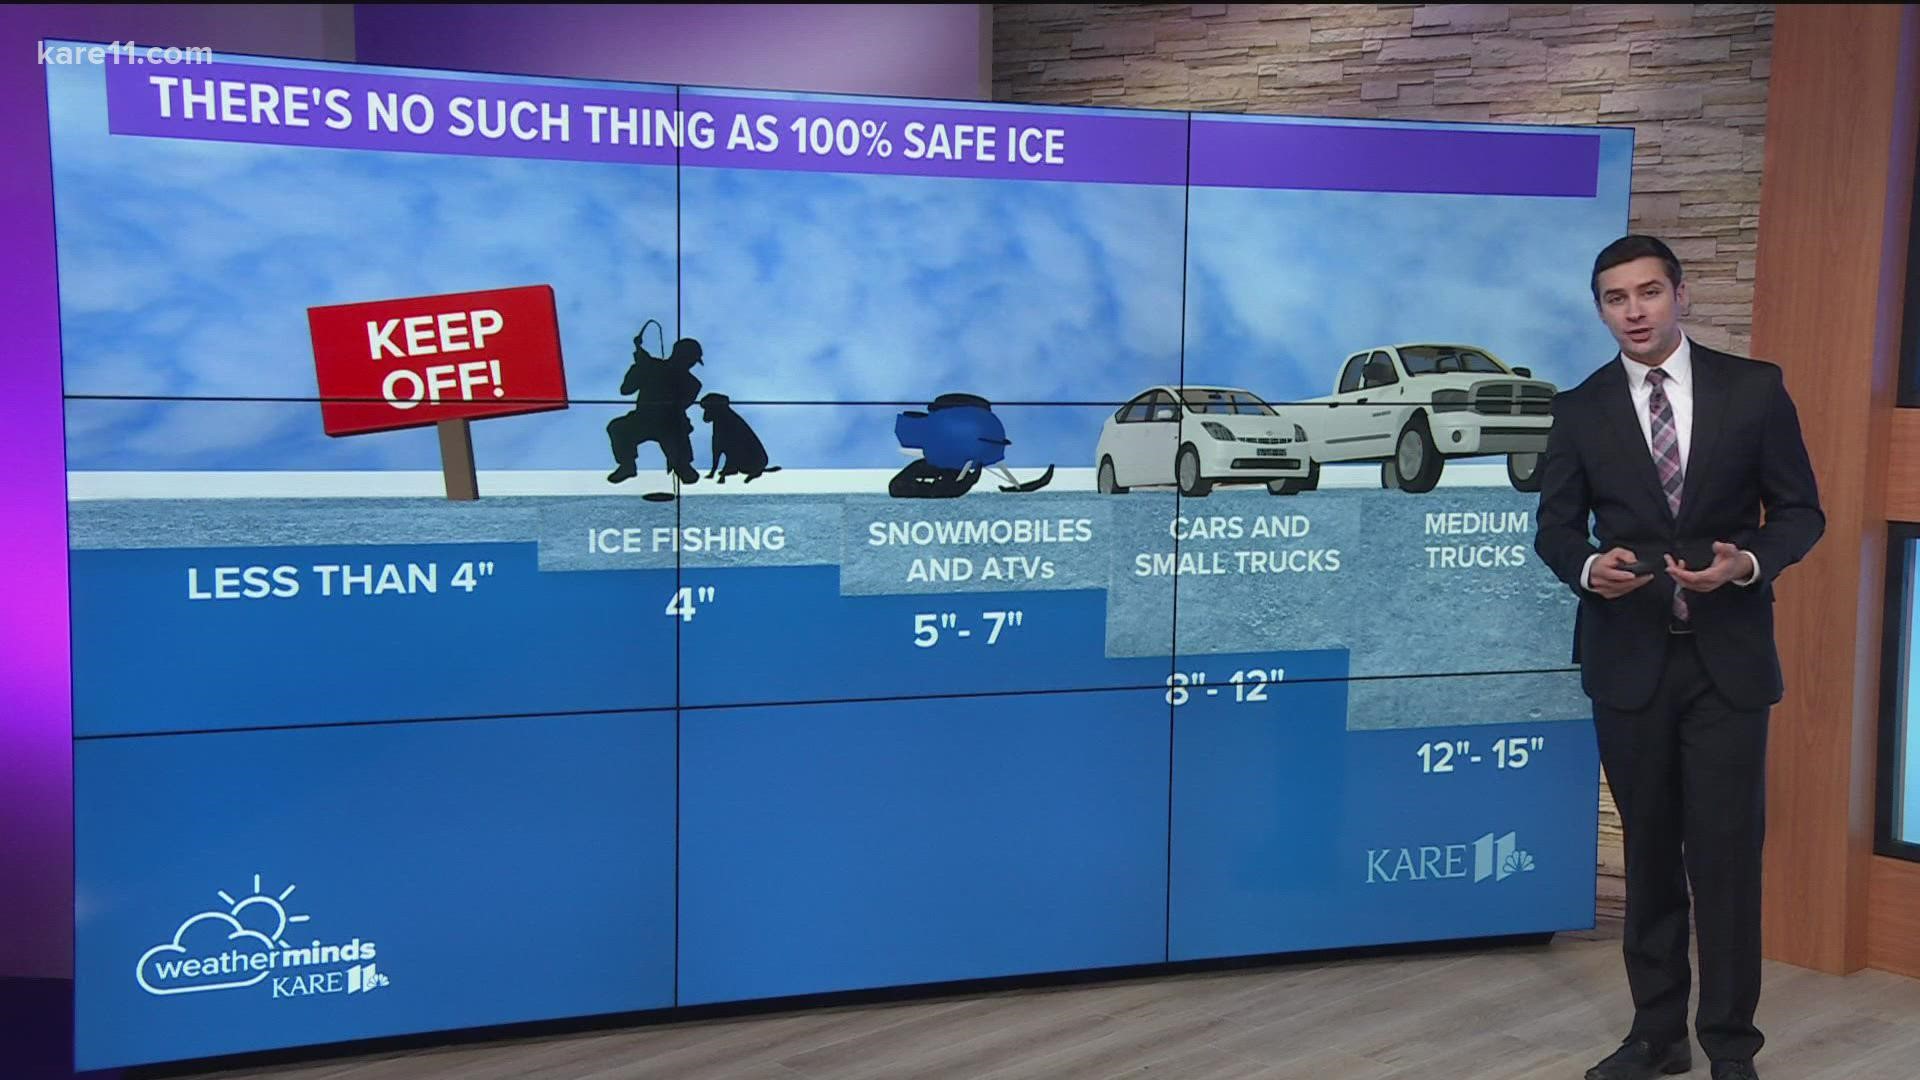 KARE 11's Ben Dery has some ice safety tips as part of Winter Weather Awareness Week.